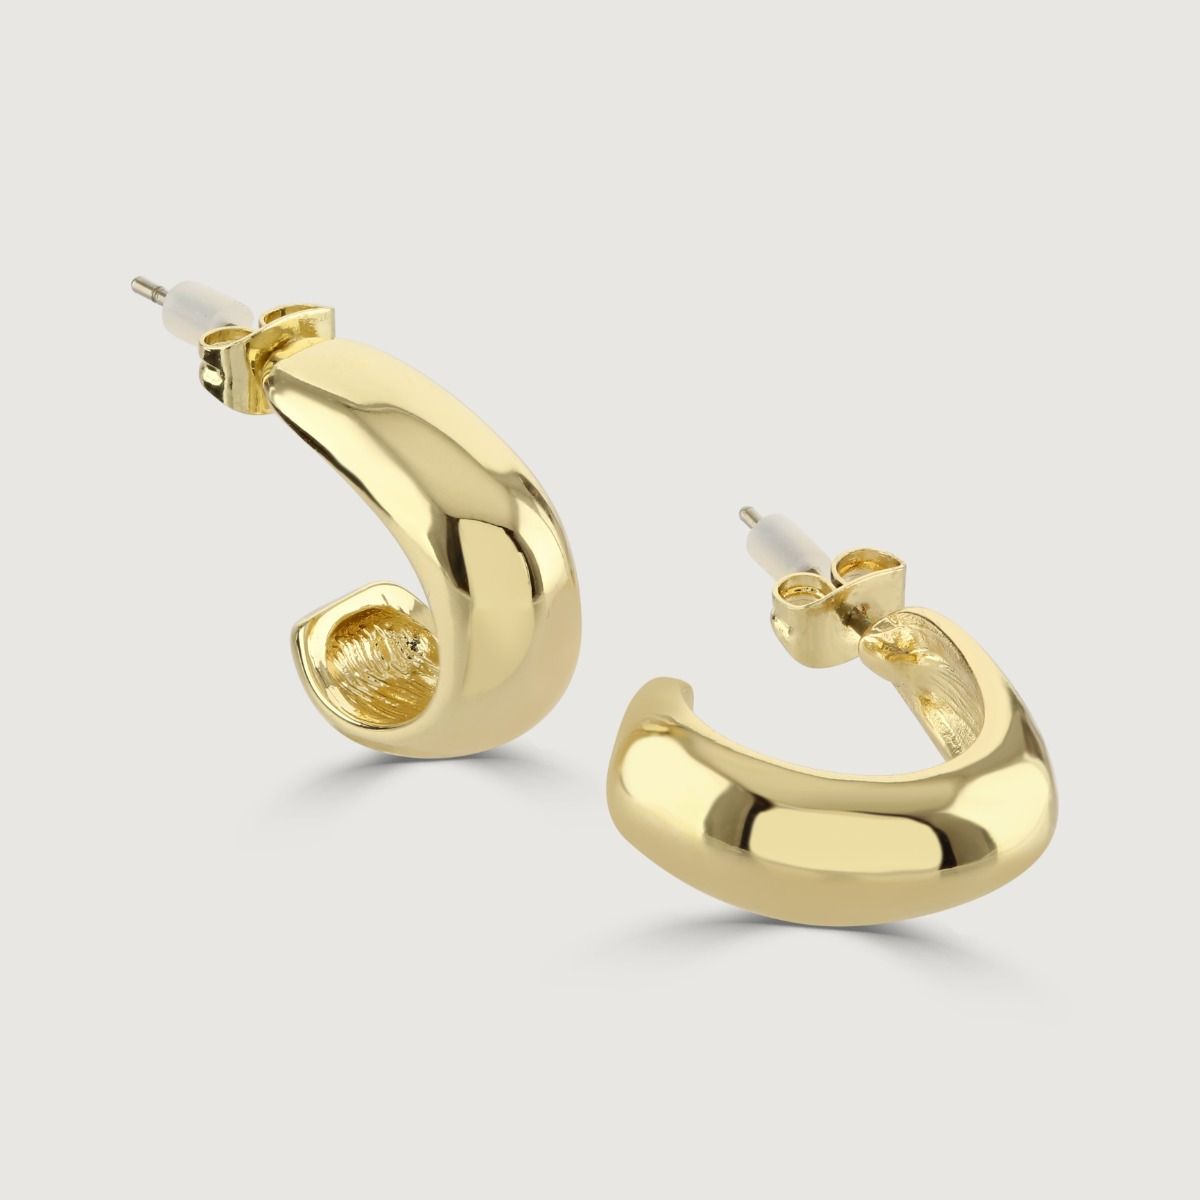 The Polished Gold Stud Hoop Earrings are a chic and versatile accessory. With their sleek and polished design, these earrings add a touch of glamour to any outfit. 